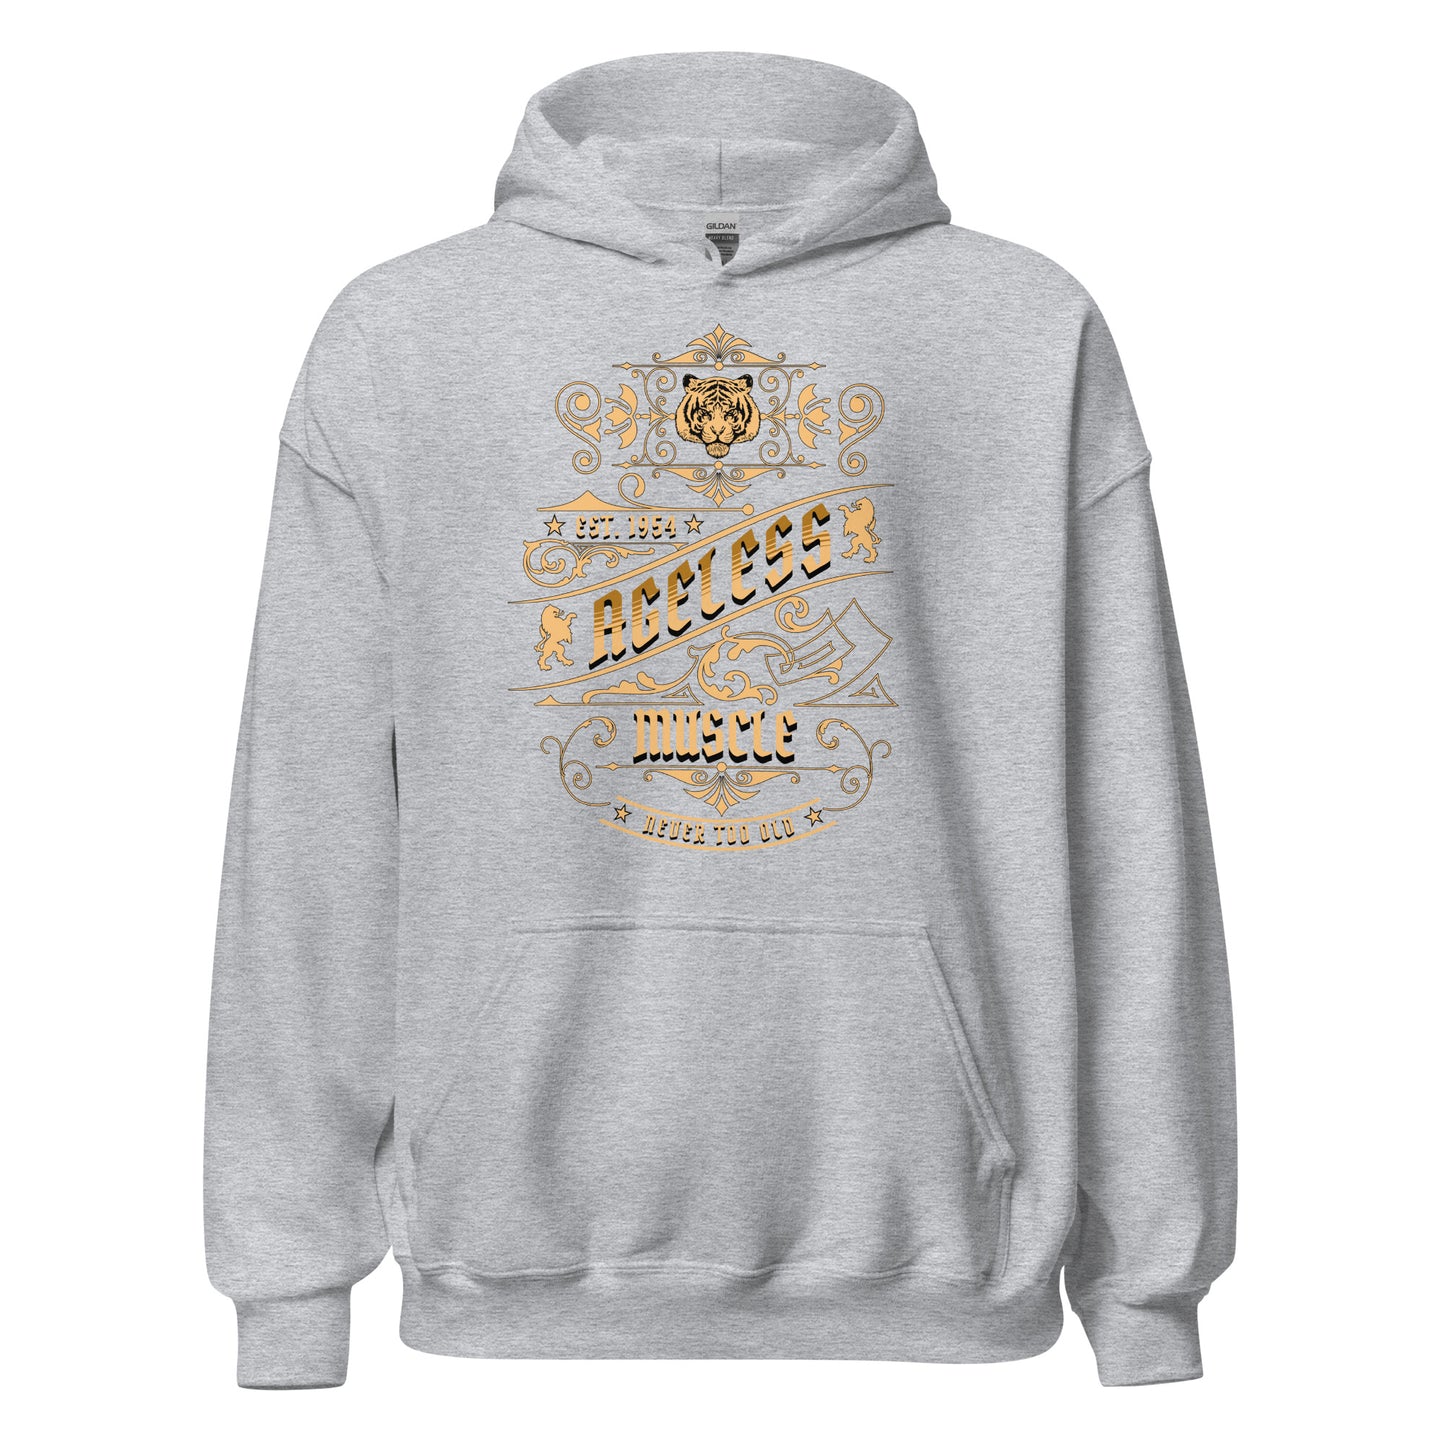 Ageless Muscle: Never Too Old Unisex Hoodie